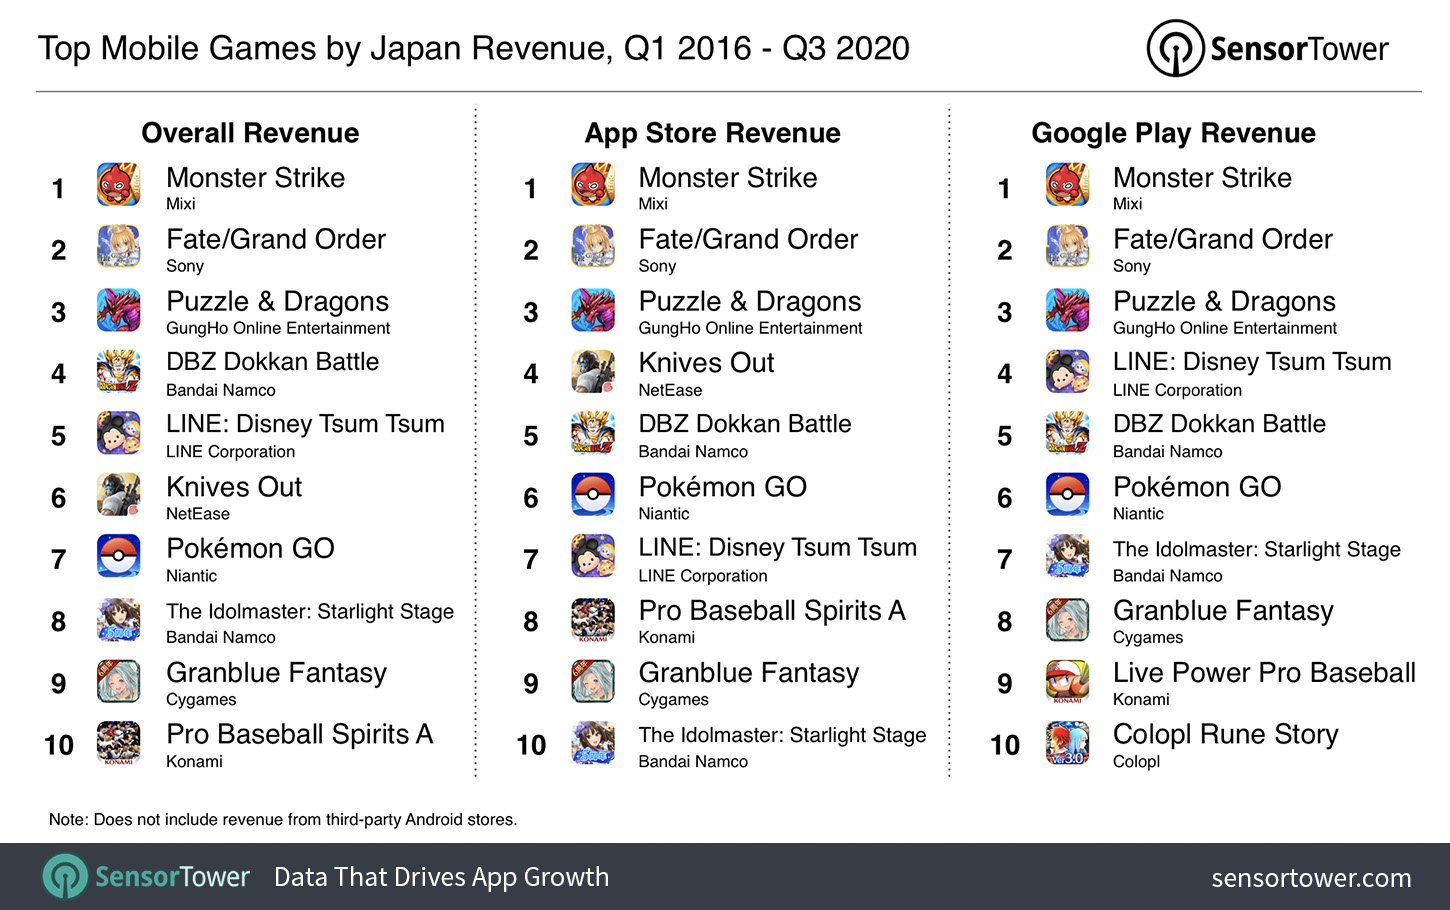 Top Mobile Games by Japan Revenue Q1 2016 to Q3 2020